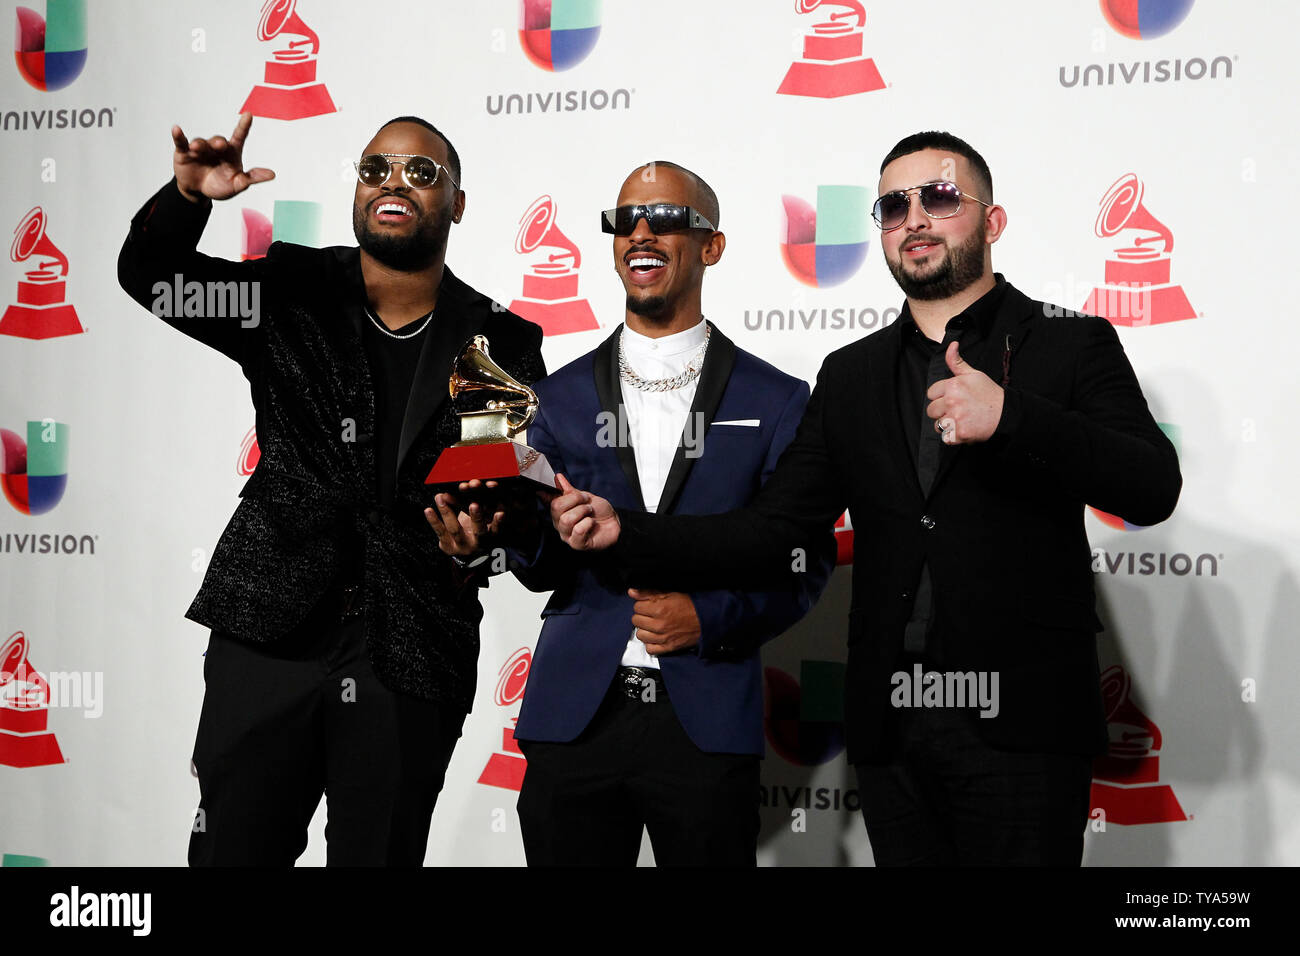 Luis 'Rome' Romero (L), DJ Urba and Juan Rivera 'Gaby Music' Vazquez  appear backstage with the award for best urban album for 'Dura' during the 19th annual Latin Grammy Awards at the MGM Garden Arena in Las Vegas, Nevada on November 15, 2018. Photo by James Atoa/UPI Stock Photo